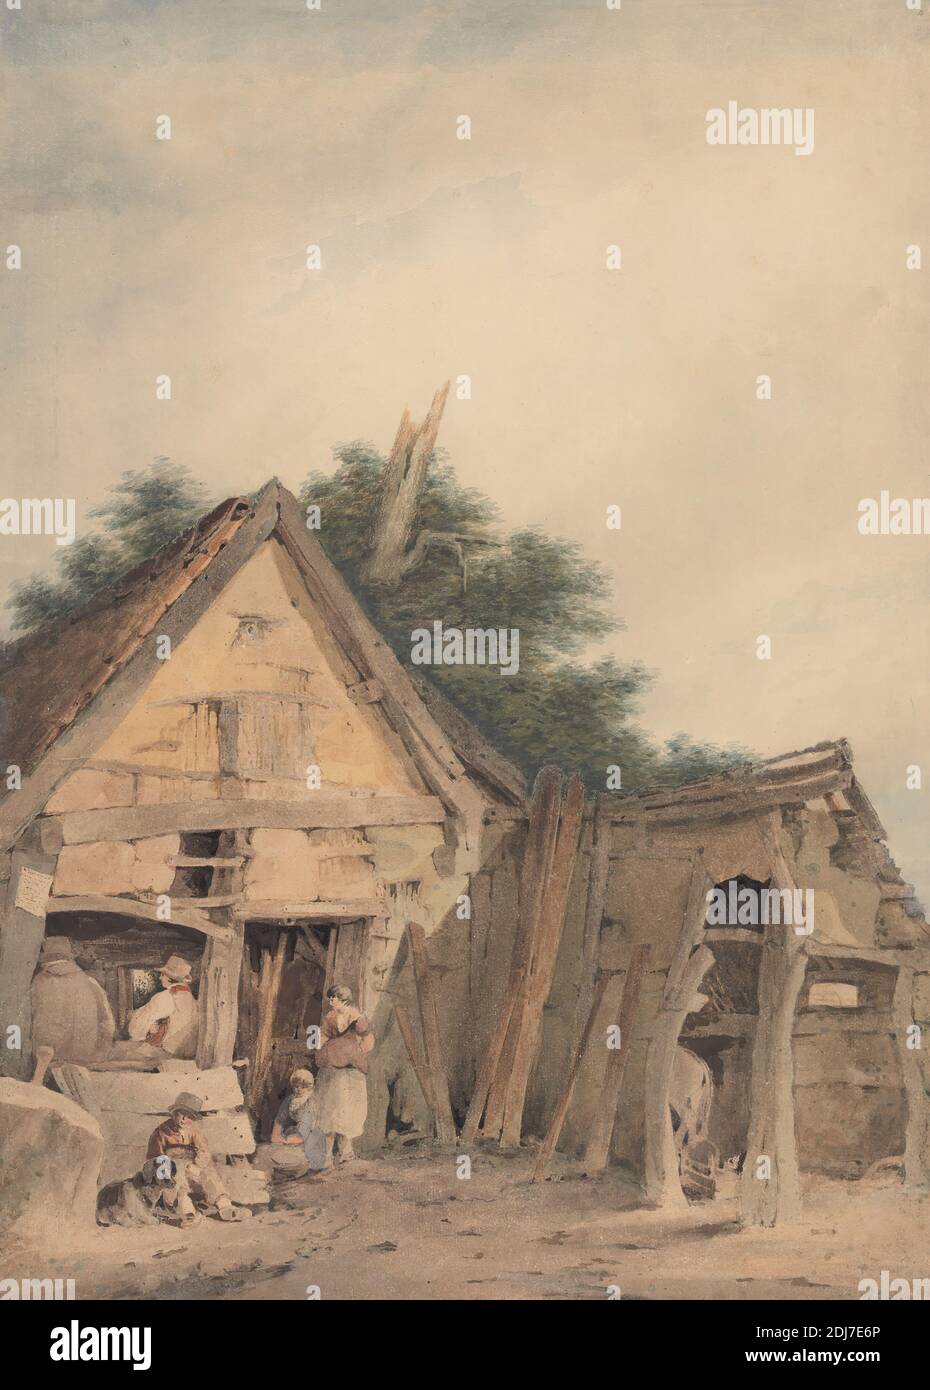 The Blacksmith's Shop, Hingham, John Crome, 1768–1821, British, Formerly Attributed to Robert Dixon, 1780–1815, British, between 1807 and 1809, Watercolor and graphite on thick, moderately textured, cream wove paper, Sheet: 24 × 17 1/4 inches (61 × 43.8 cm), architectural subject, blacksmith, shop Stock Photo